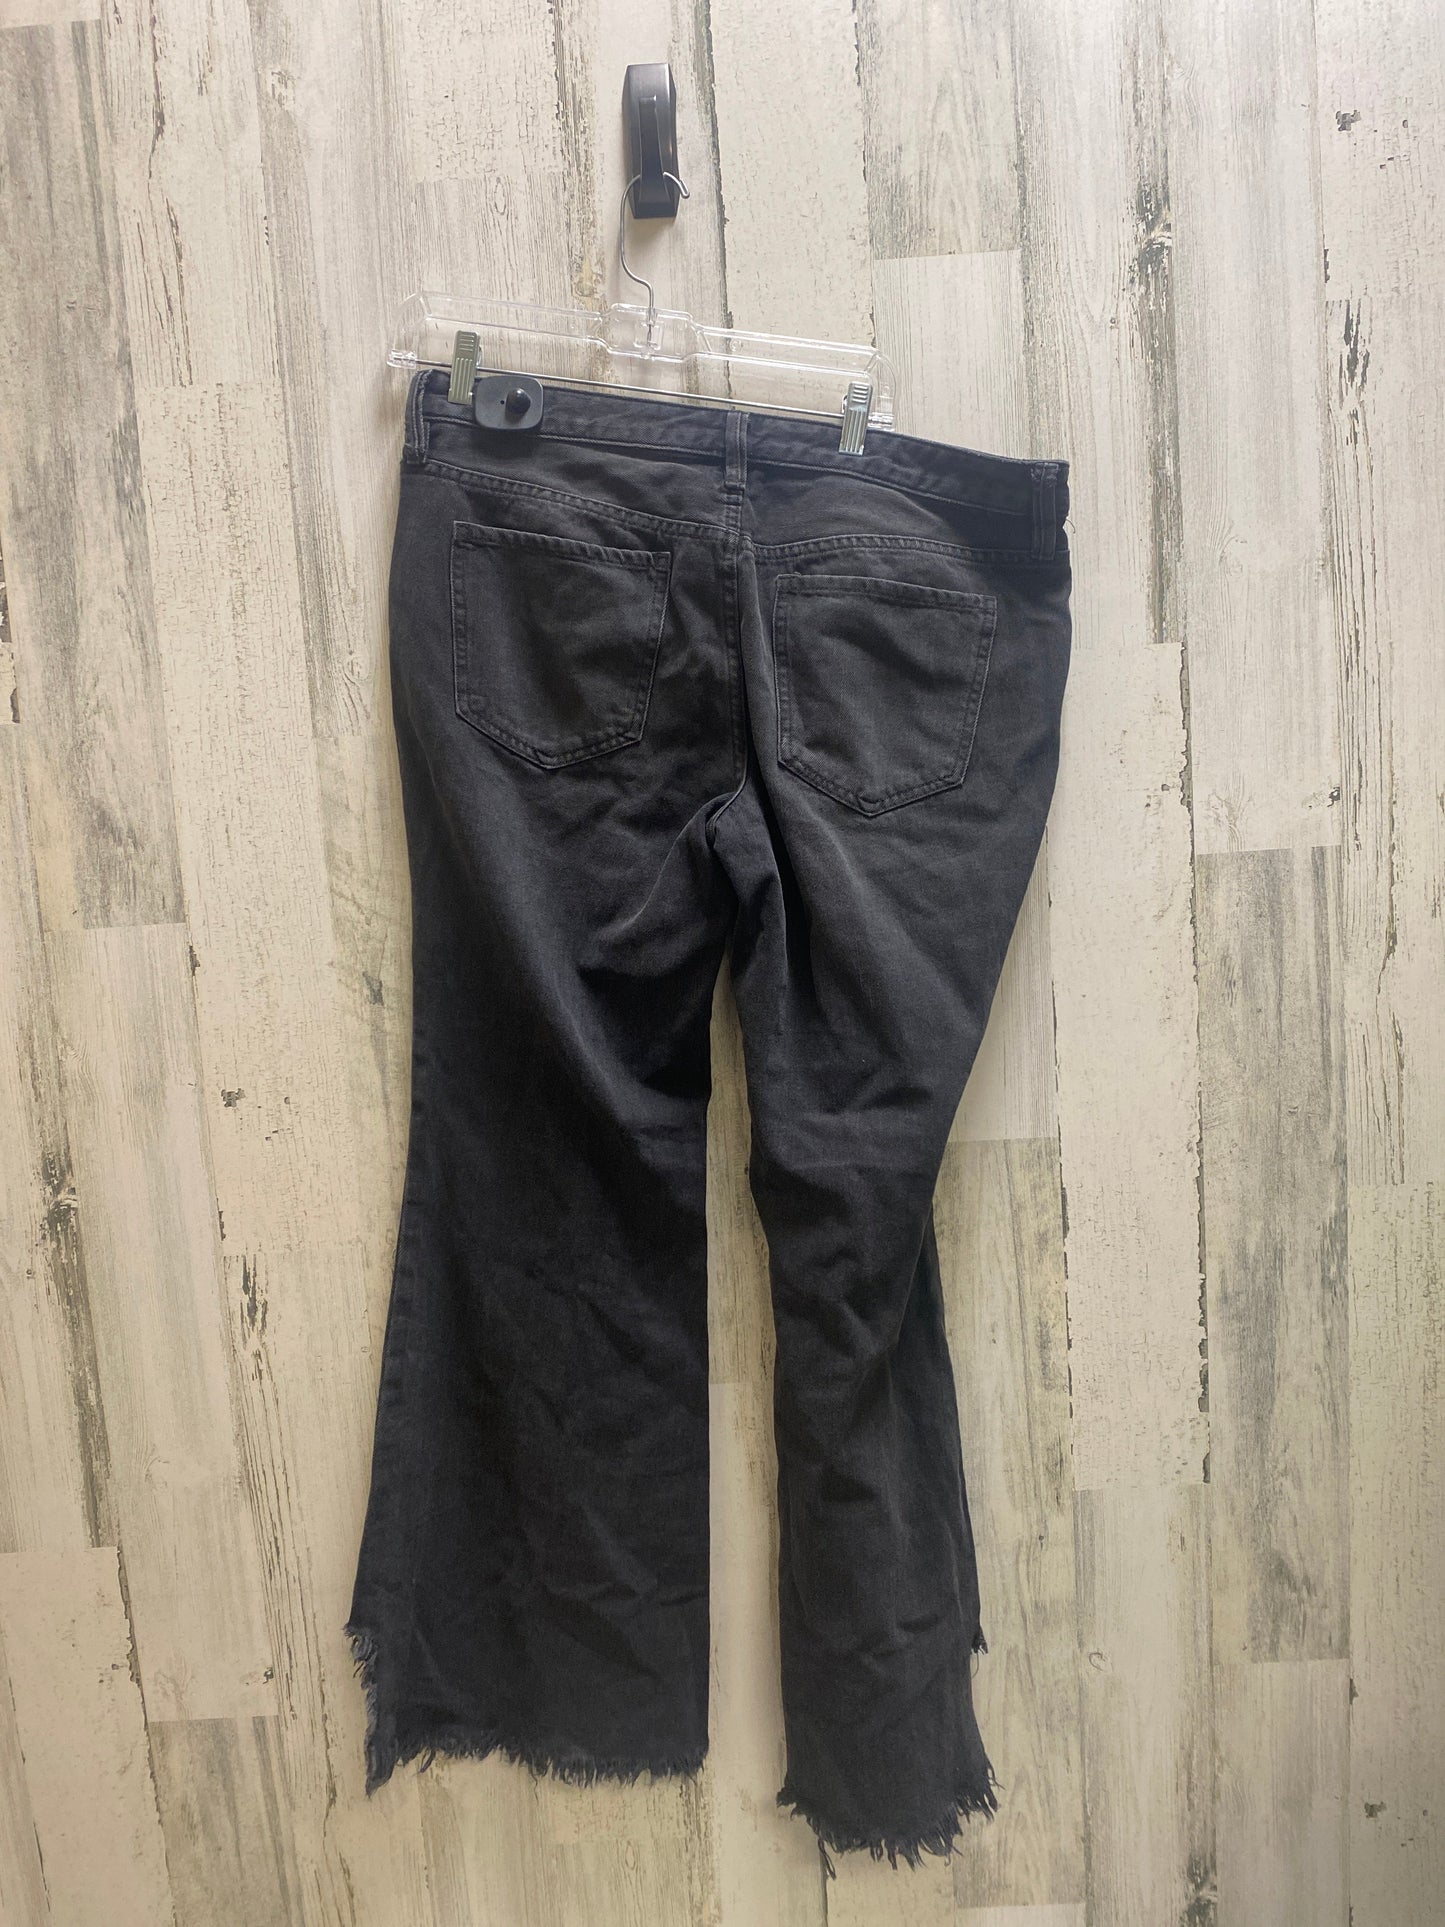 Jeans Relaxed/boyfriend By We The Free  Size: 12